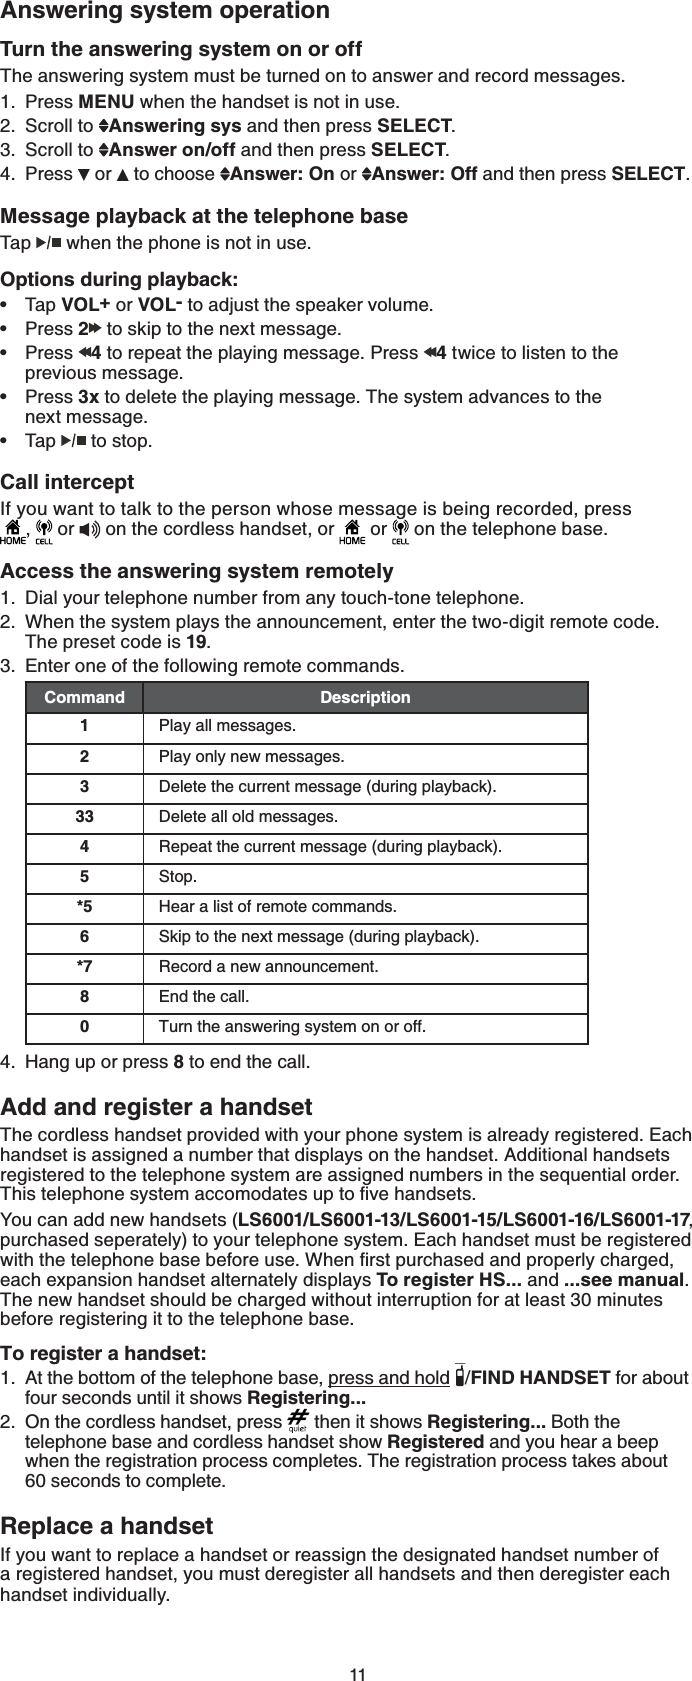 11Answering system operationTurn the answering system on or offThe answering system must be turned on to answer and record messages. Press MENU when the handset is not in use.Scroll to  Answering sys and then press SELECT.Scroll to  Answer on/off and then press SELECT.Press  or   to choose  Answer: On or  Answer: Off and then press SELECT.Message playback at the telephone base Tap  when the phone is not in use.Options during playback:Tap VOL+ or VOL- to adjust the speaker volume.Press 2 to skip to the next message.Press  4 to repeat the playing message. Press  4 twice to listen to the previous message.Press 3x to delete the playing message. The system advances to the next message.Tap  to stop.Call interceptIf you want to talk to the person whose message is being recorded, press            ,   or   on the cordless handset, or   or   on the telephone base.Access the answering system remotelyDial your telephone number from any touch-tone telephone.When the system plays the announcement, enter the two-digit remote code. The preset code is 19.Enter one of the following remote commands.Command Description1Play all messages.2Play only new messages.3Delete the current message (during playback).33 Delete all old messages.4Repeat the current message (during playback).5Stop.*5 Hear a list of remote commands.6Skip to the next message (during playback).*7 Record a new announcement.8End the call.0Turn the answering system on or off.Hang up or press 8 to end the call.Add and register a handsetThe cordless handset provided with your phone system is already registered. Each handset is assigned a number that displays on the handset. Additional handsets registered to the telephone system are assigned numbers in the sequential order. 6JKUVGNGRJQPGU[UVGOCEEQOQFCVGUWRVQſXGJCPFUGVUYou can add new handsets (LS6001/LS6001-13/LS6001-15/LS6001-16/LS6001-17,purchased seperately) to your telephone system. Each handset must be registered YKVJVJGVGNGRJQPGDCUGDGHQTGWUG9JGPſTUVRWTEJCUGFCPFRTQRGTN[EJCTIGFeach expansion handset alternately displays To register HS... and ...see manual.The new handset should be charged without interruption for at least 30 minutes before registering it to the telephone base.To register a handset:At the bottom of the telephone base, press and hold /FIND HANDSET for about four seconds until it shows Registering...On the cordless handset, press   then it shows Registering... Both the telephone base and cordless handset show Registered and you hear a beep when the registration process completes. The registration process takes about  60 seconds to complete.Replace a handsetIf you want to replace a handset or reassign the designated handset number of a registered handset, you must deregister all handsets and then deregister each handset individually.1.2.3.4.•••••1.2.3.4.1.2.